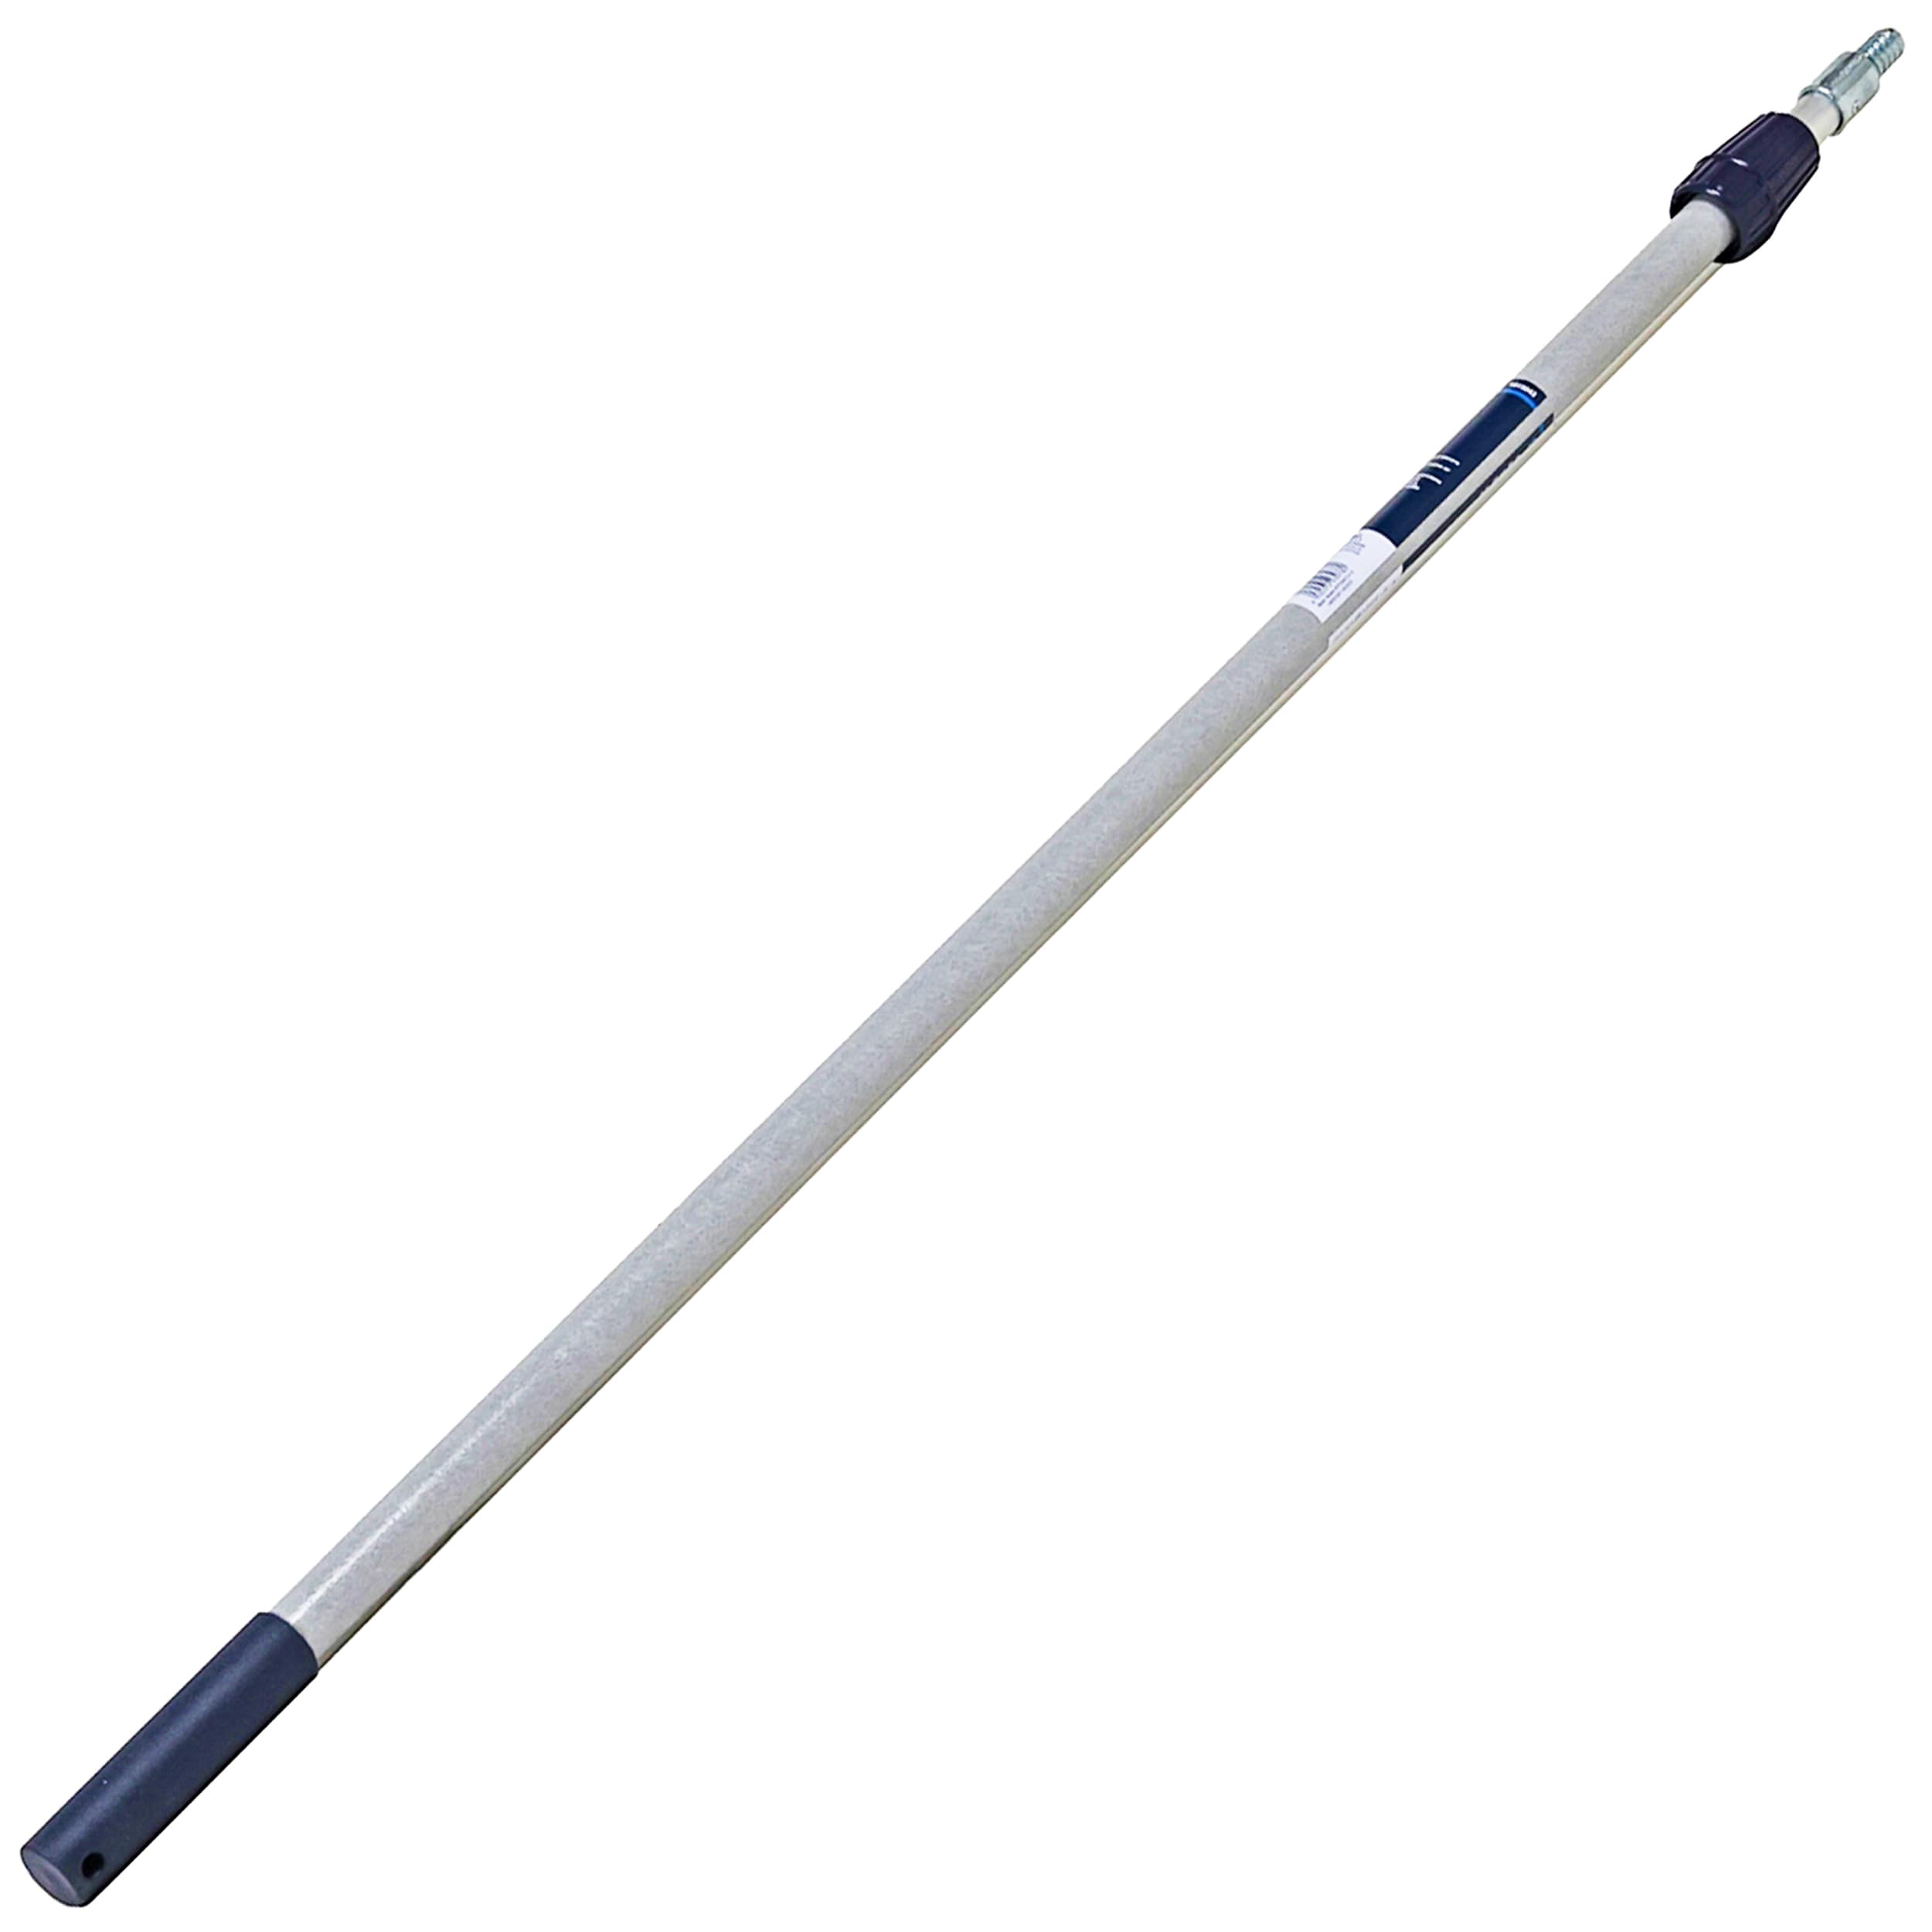 DOCAZOO, 30 ft Reach, 6 to 24 ft Telescoping Extension Pole | Multi-Purpose  for Hanging Light Bulb Changer, Paint Roller, Duster, Window/Gutter